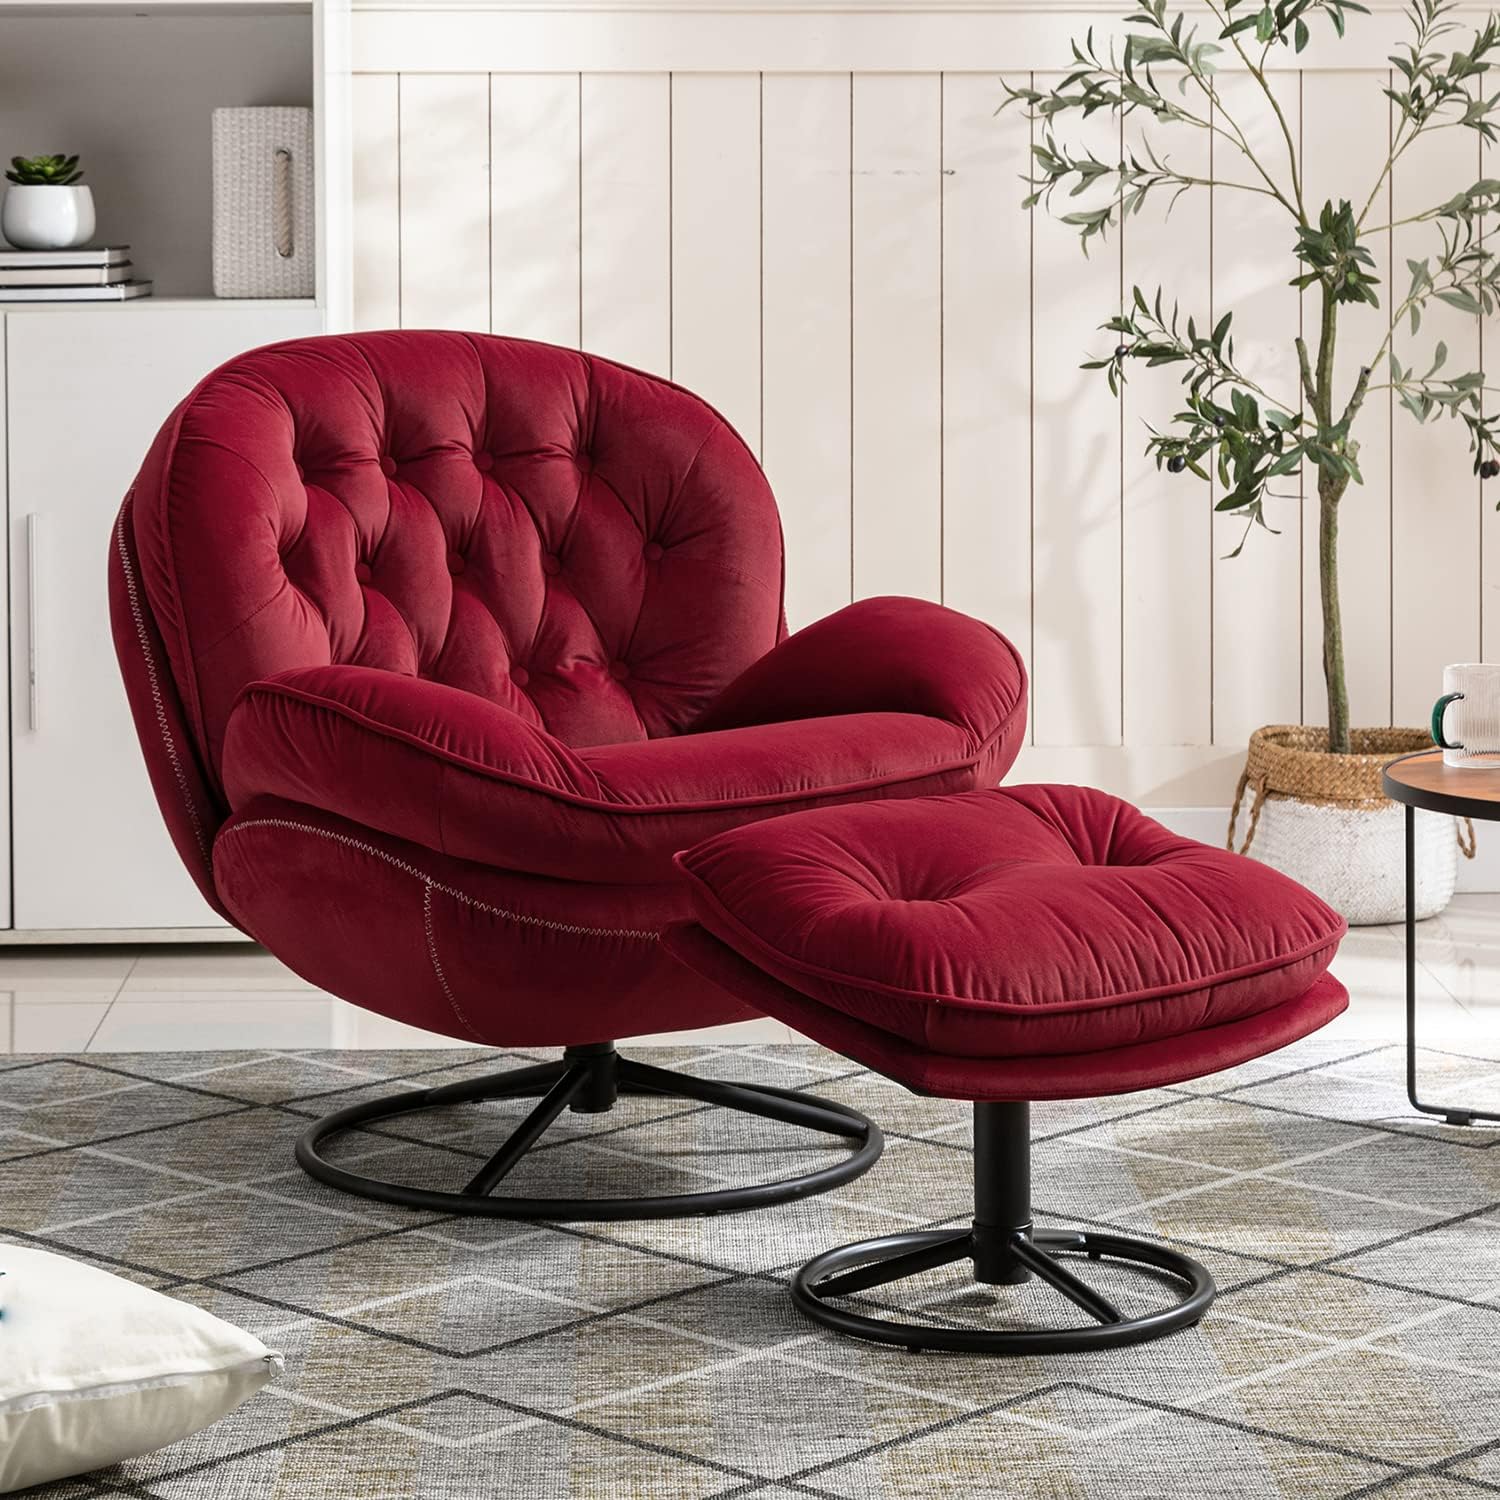 Madi Velvet Swivel Accent Chair With Ottoman, 12 colors